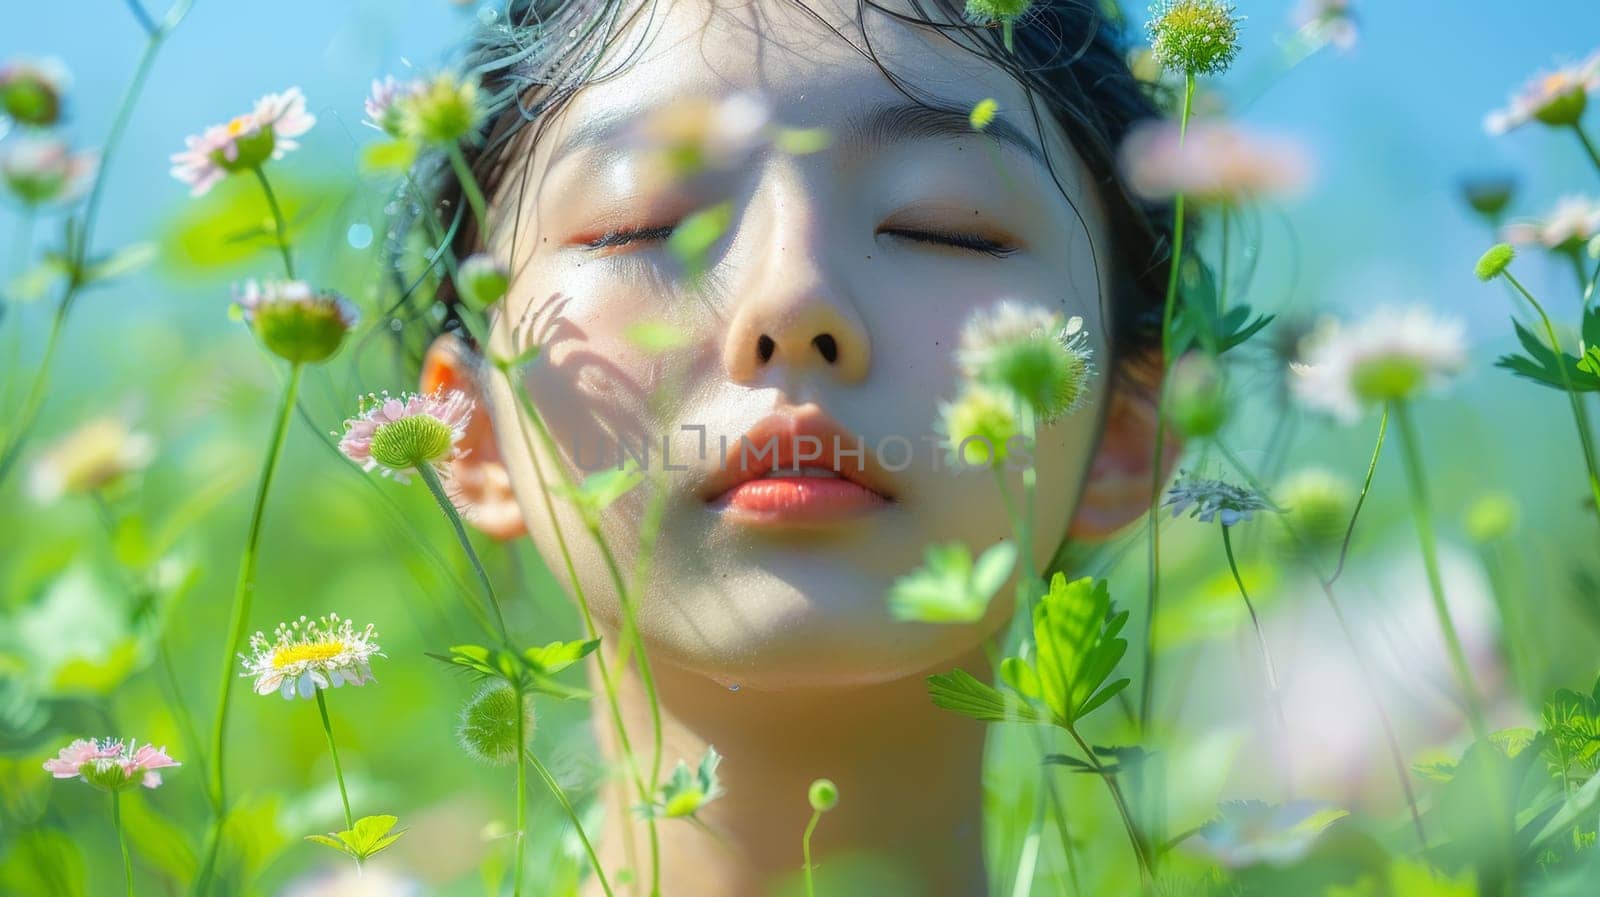 A woman with her eyes closed in a field of flowers